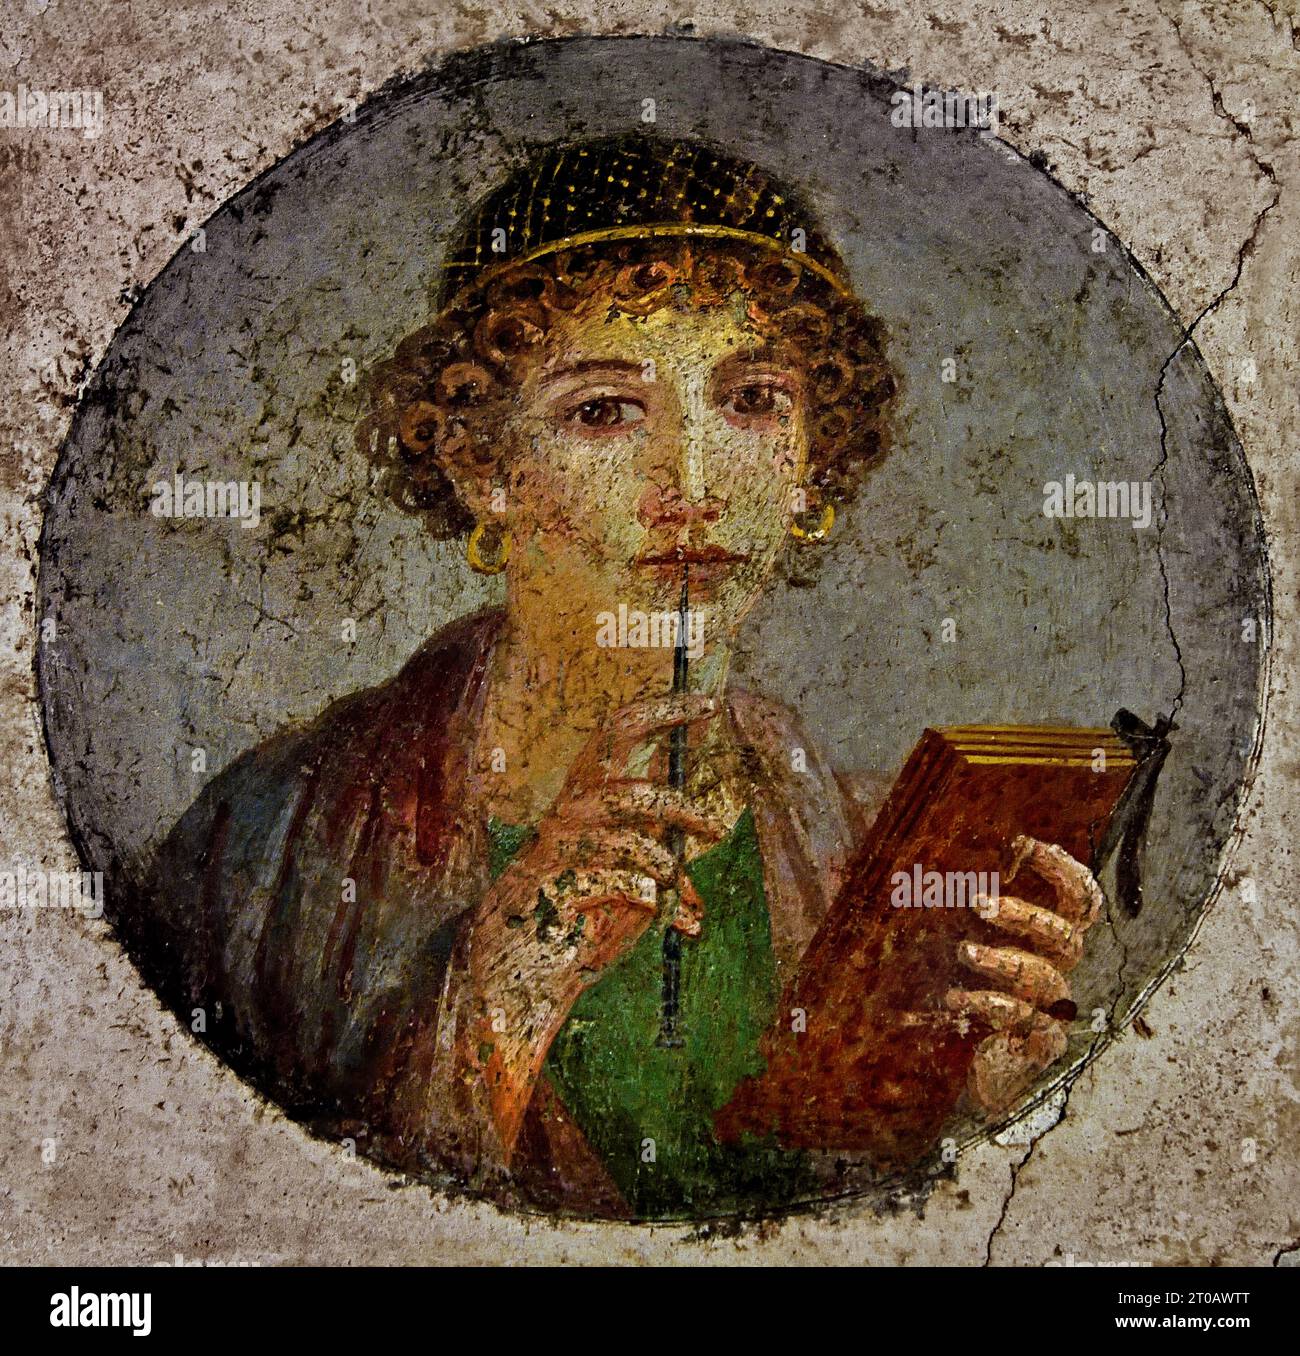 Fresco depicts a writer waiting for inspiration. It is identified with the Greek poet Sappho (c.612-c..570 B.C.).  Pompeii Roman City is located near Naples in the Campania region of Italy. Pompeii was buried under 4-6 m of volcanic ash and pumice in the eruption of Mount Vesuvius in AD 79. Italy Stock Photo